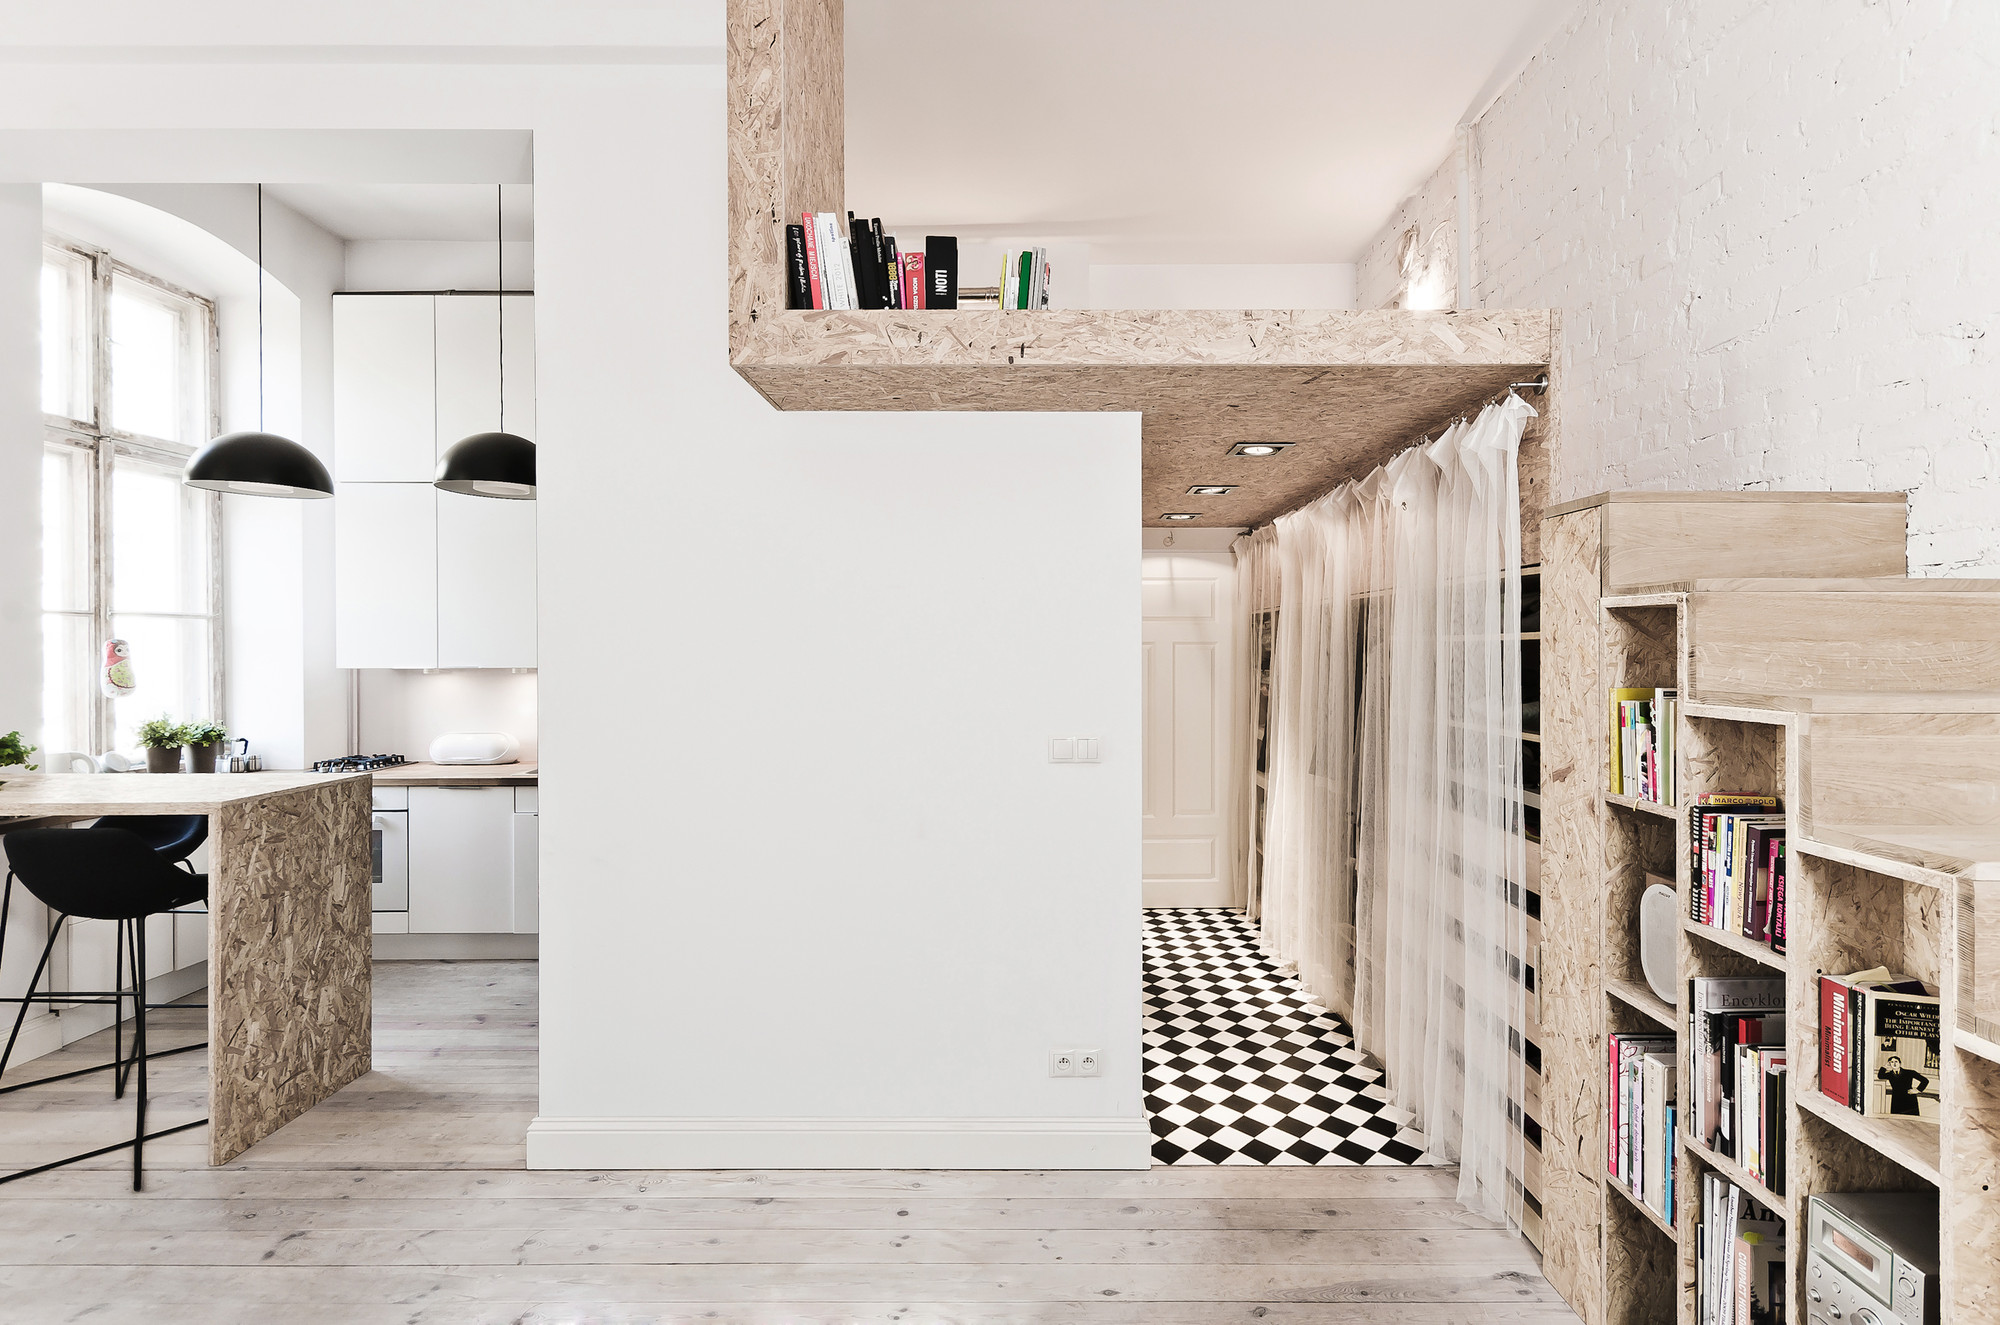 29 sqm 3xa 1 OSB Was Used To Build a Mezzanine in This Tiny 29m² Apartment